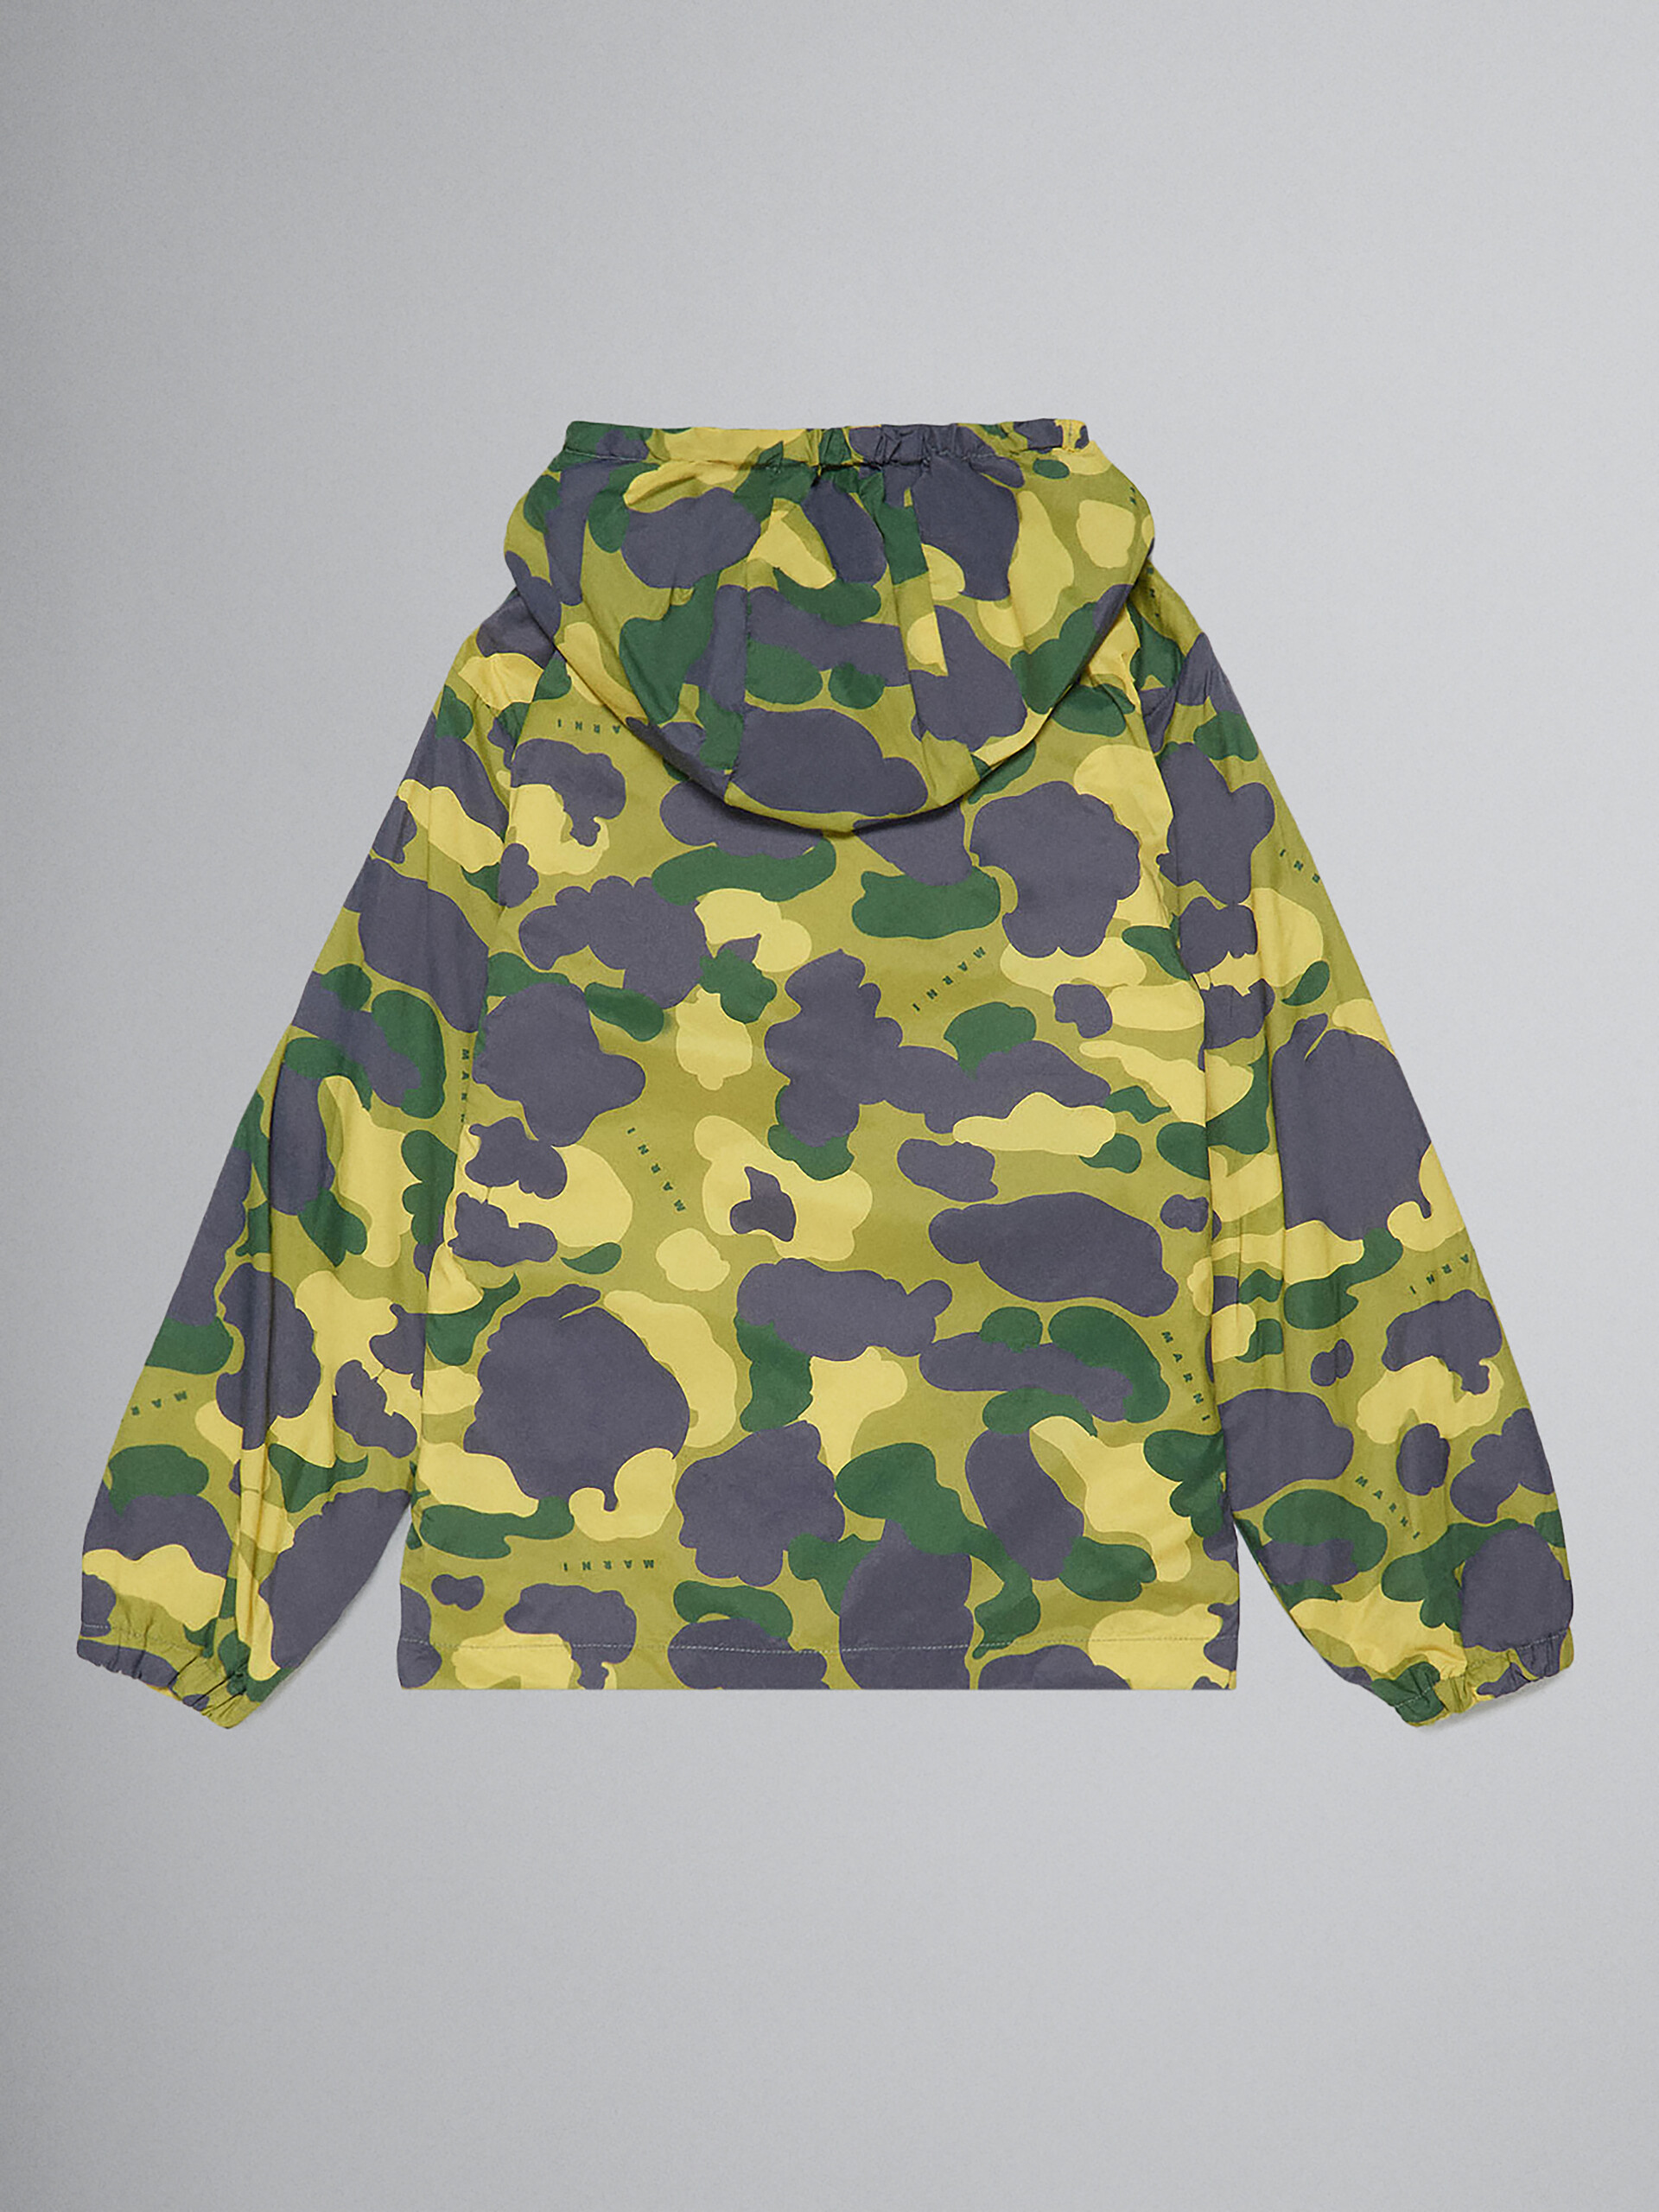 Green hooded jacket with all-over camouflage pattern - Jackets - Image 2